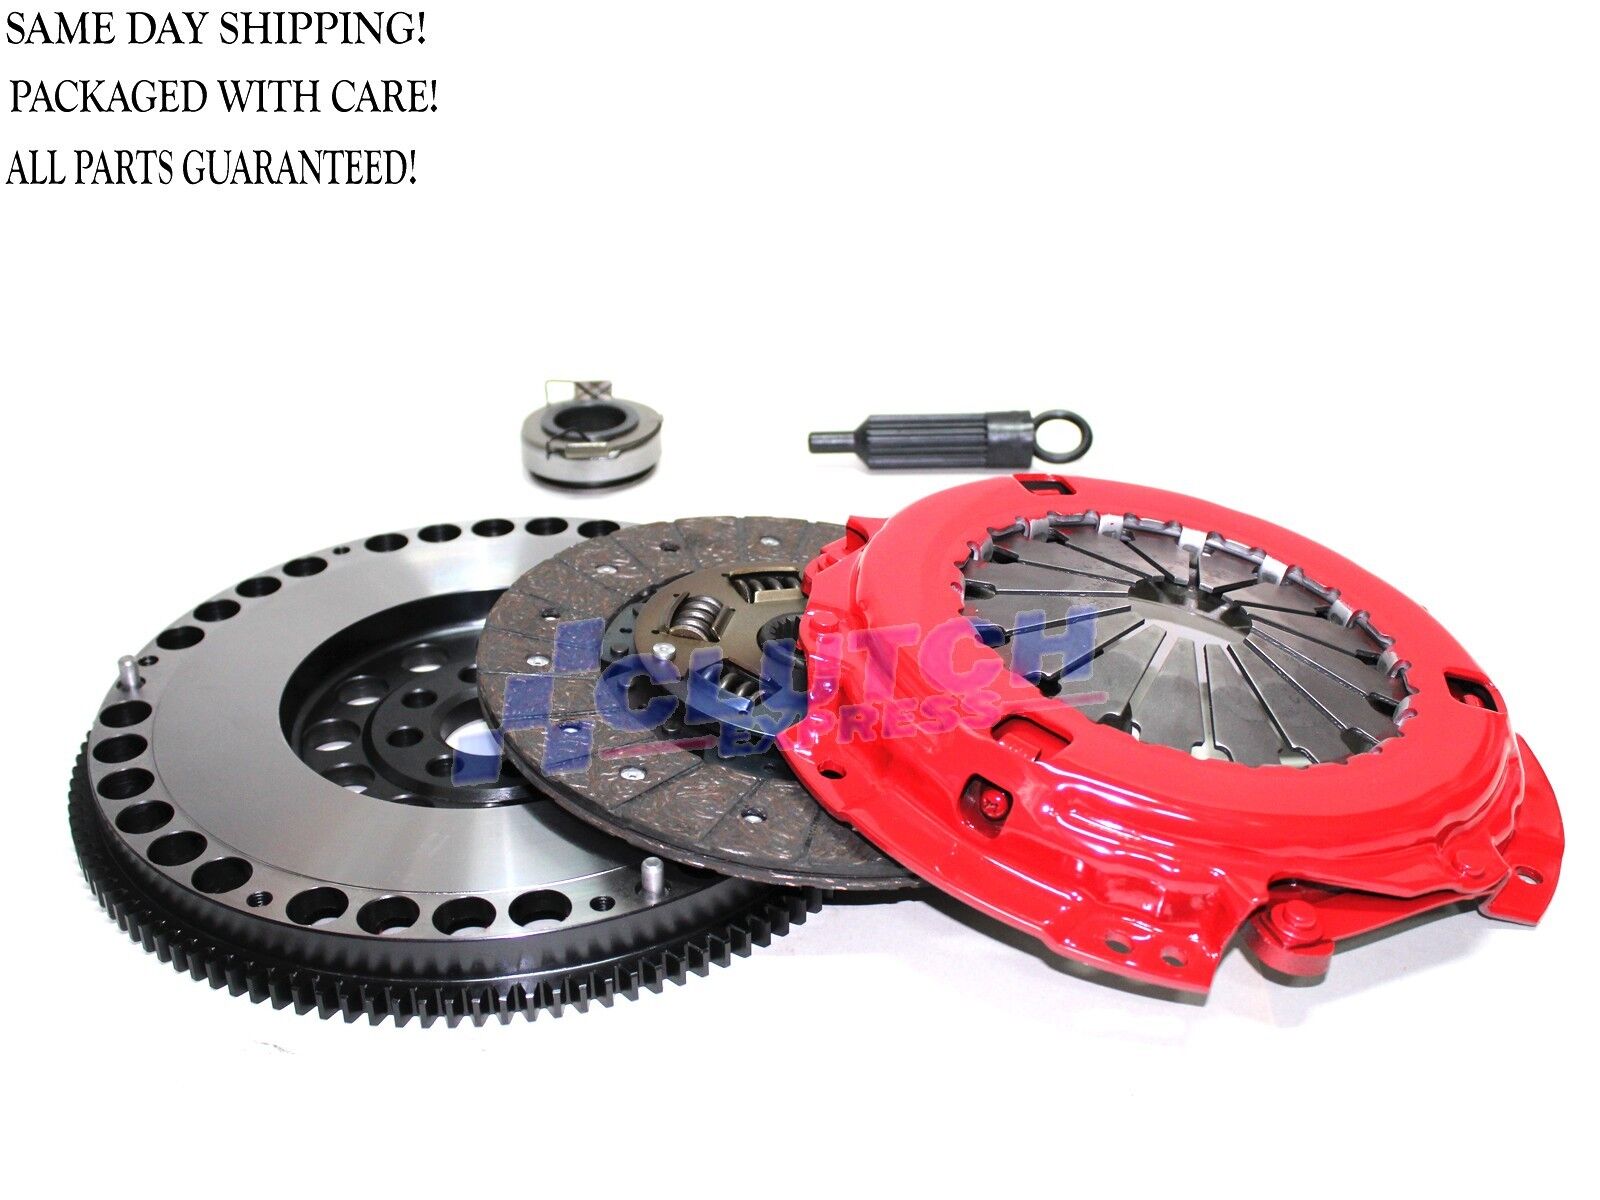 AF STAGE 2 CLUTCH KIT+PERFORMANCE RACING FLYWHEEL 2002-2009 TOYOTA CAMRY 2.4L